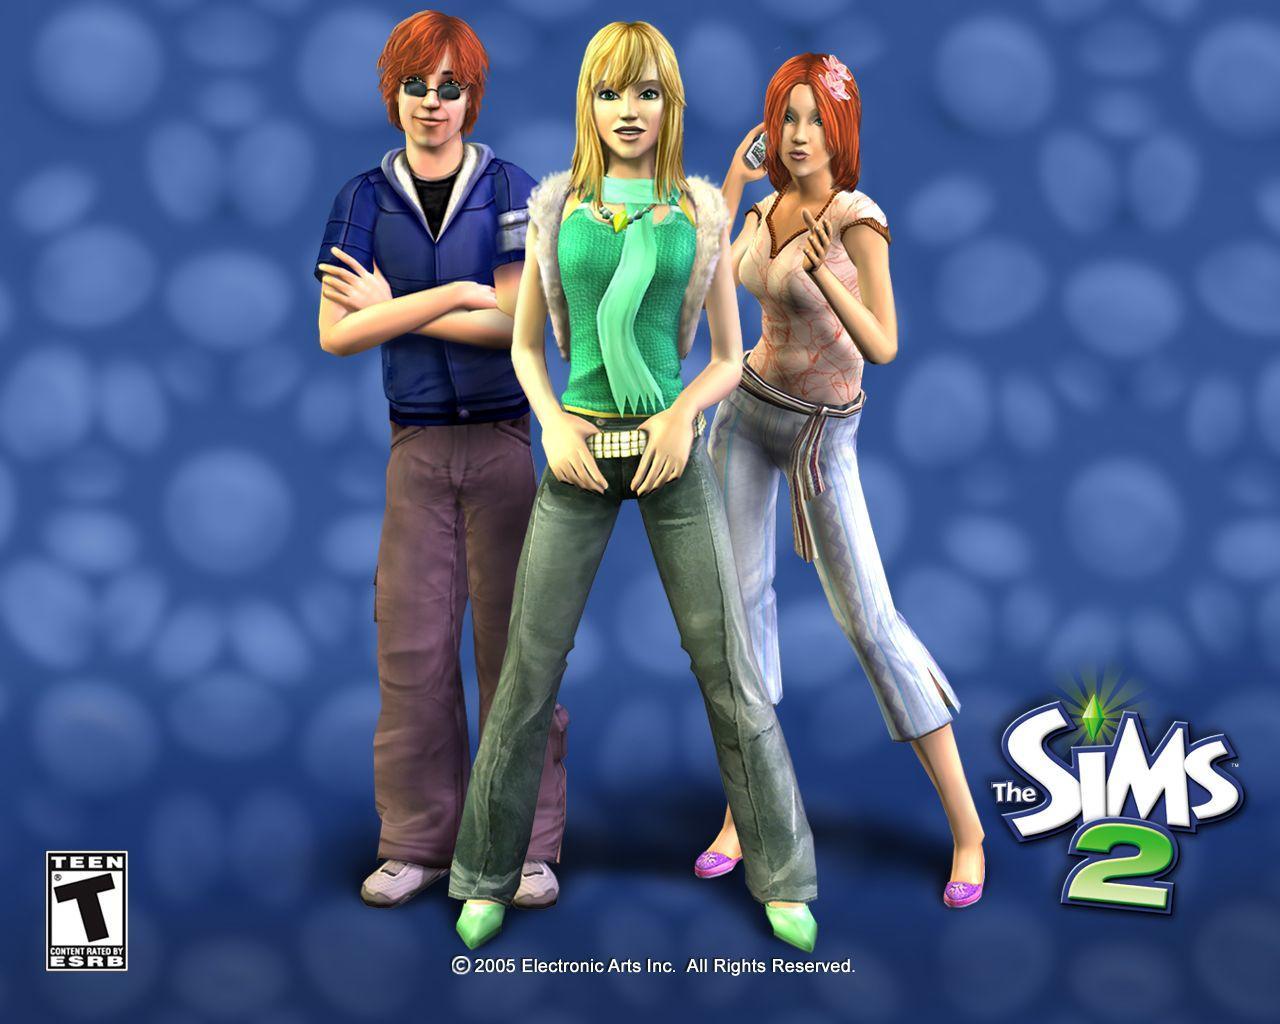 The Sims free Wallpaper (18 photo) for your desktop, download